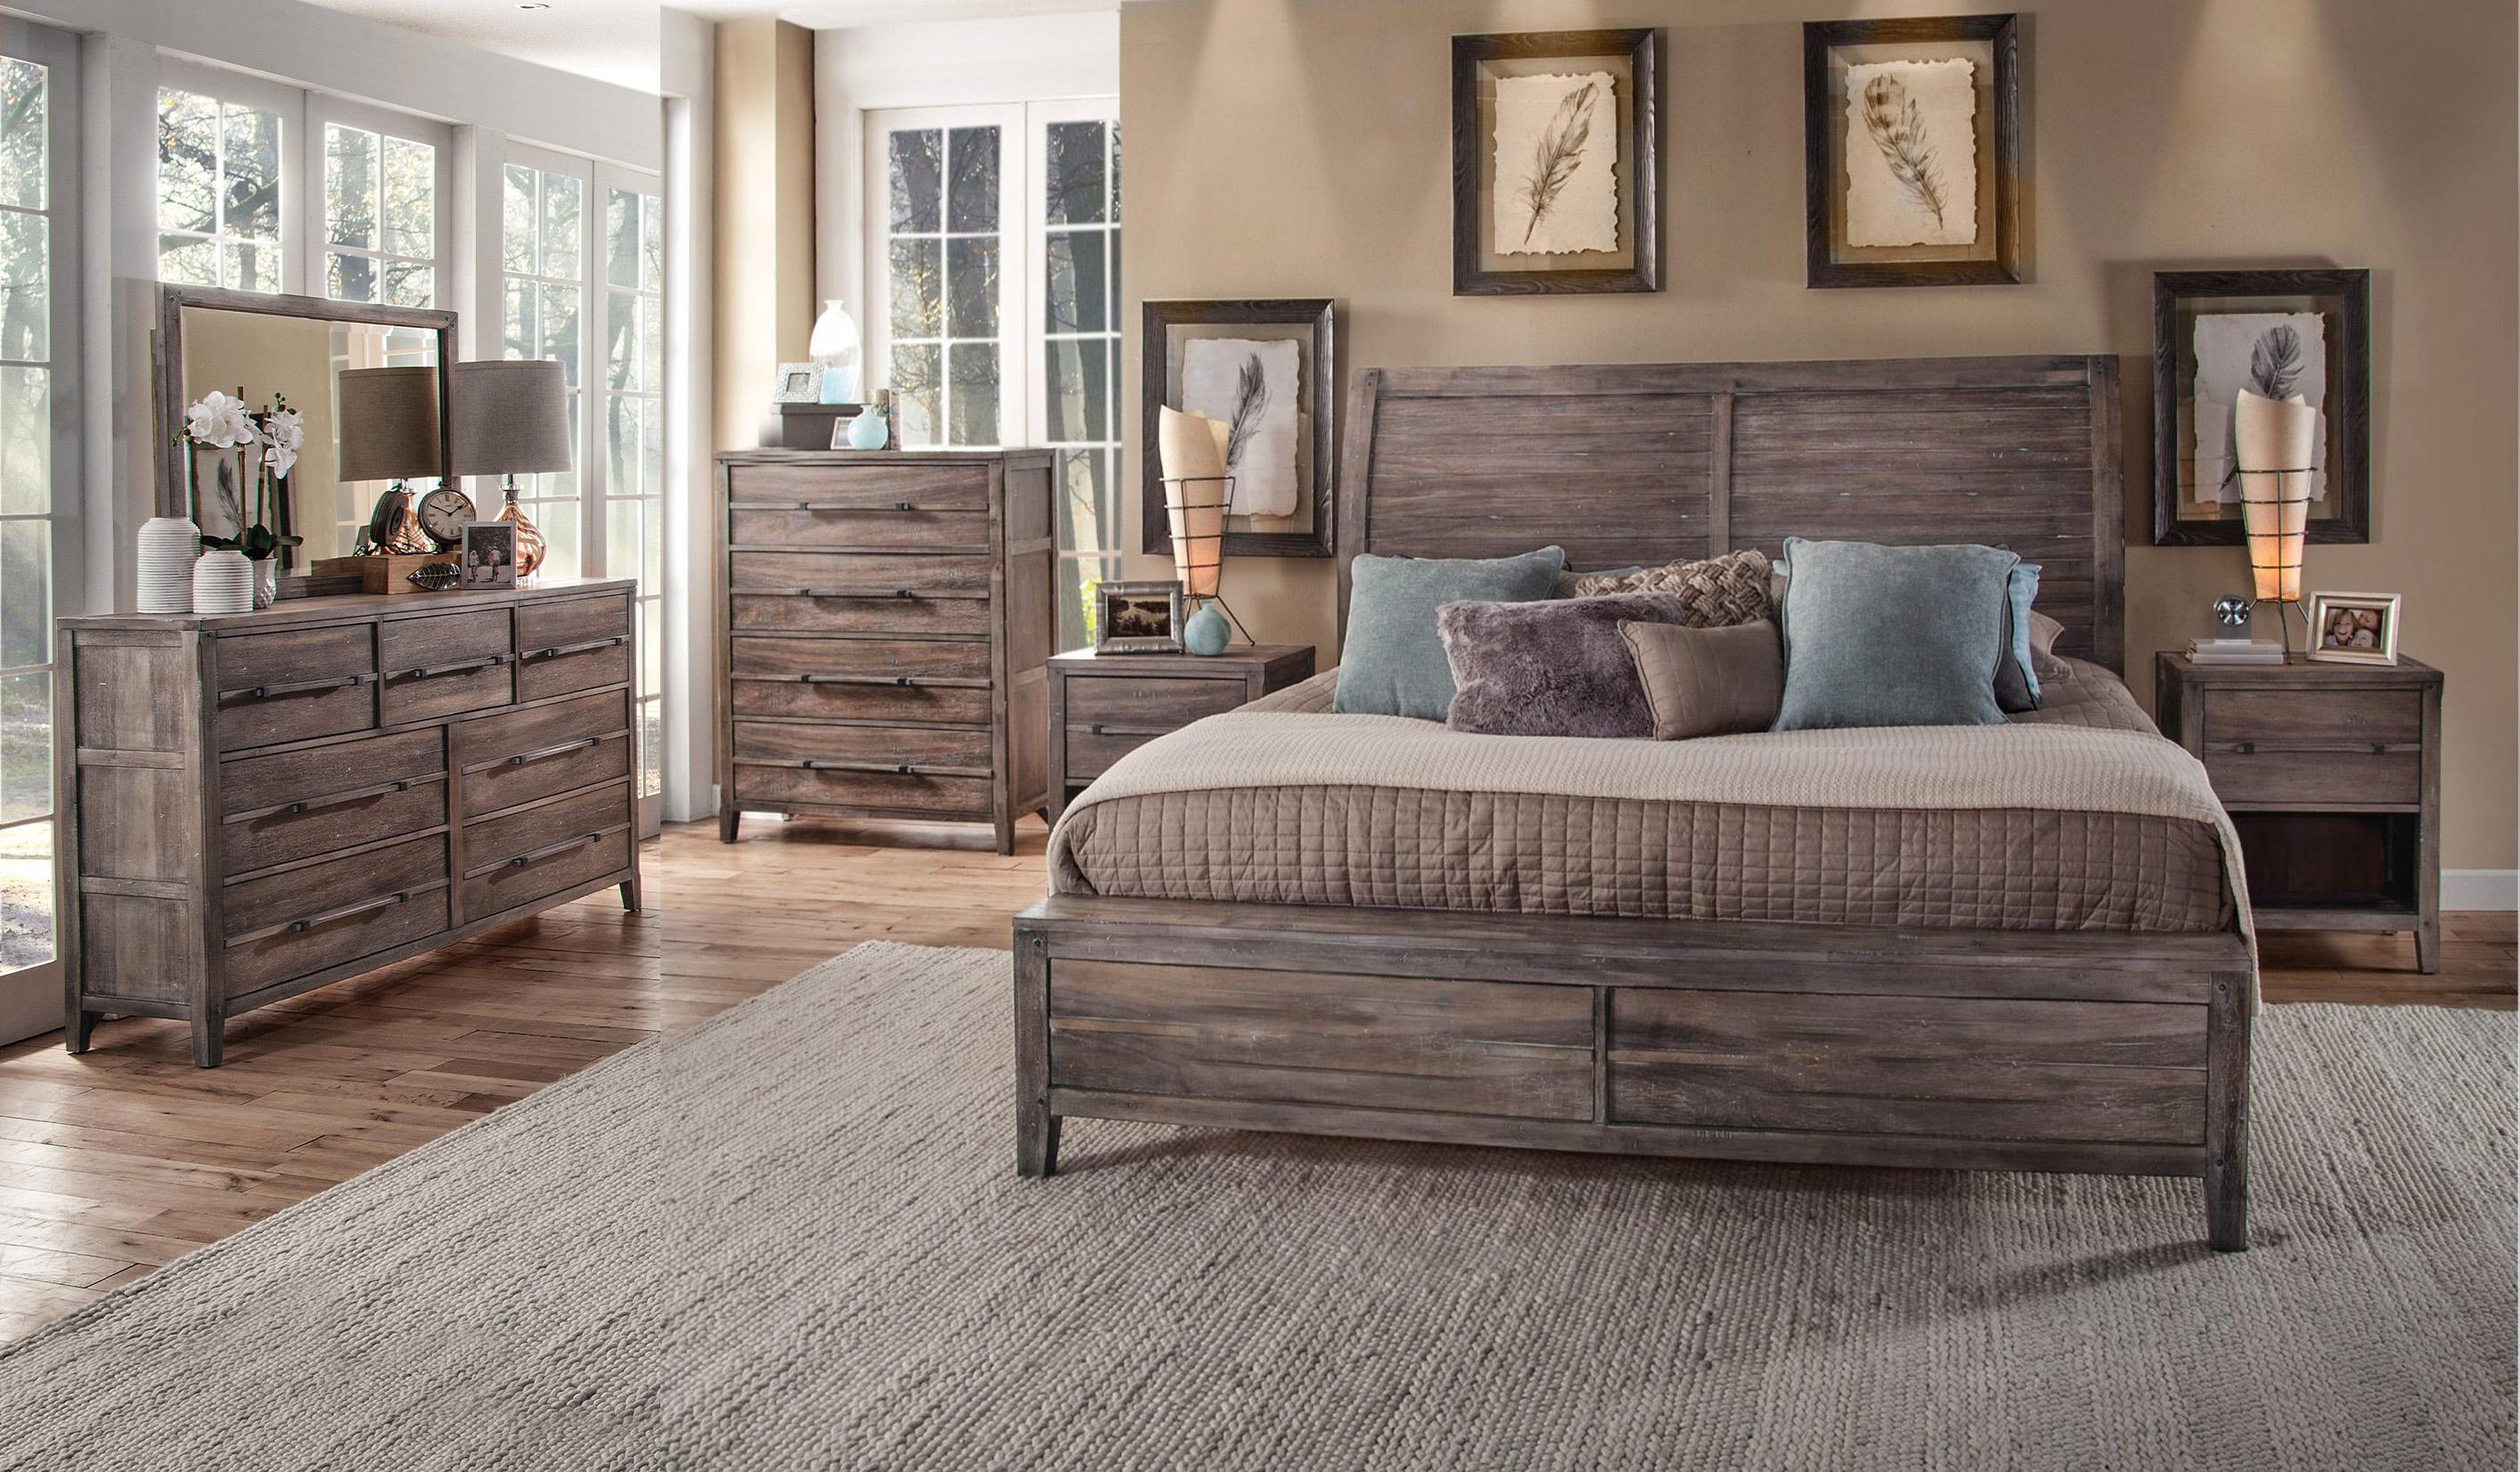 Classic, Traditional Sleigh Bedroom Set AURORA 2800-50SLP 2800-QSLPN-4PC in Driftwood, Gray 